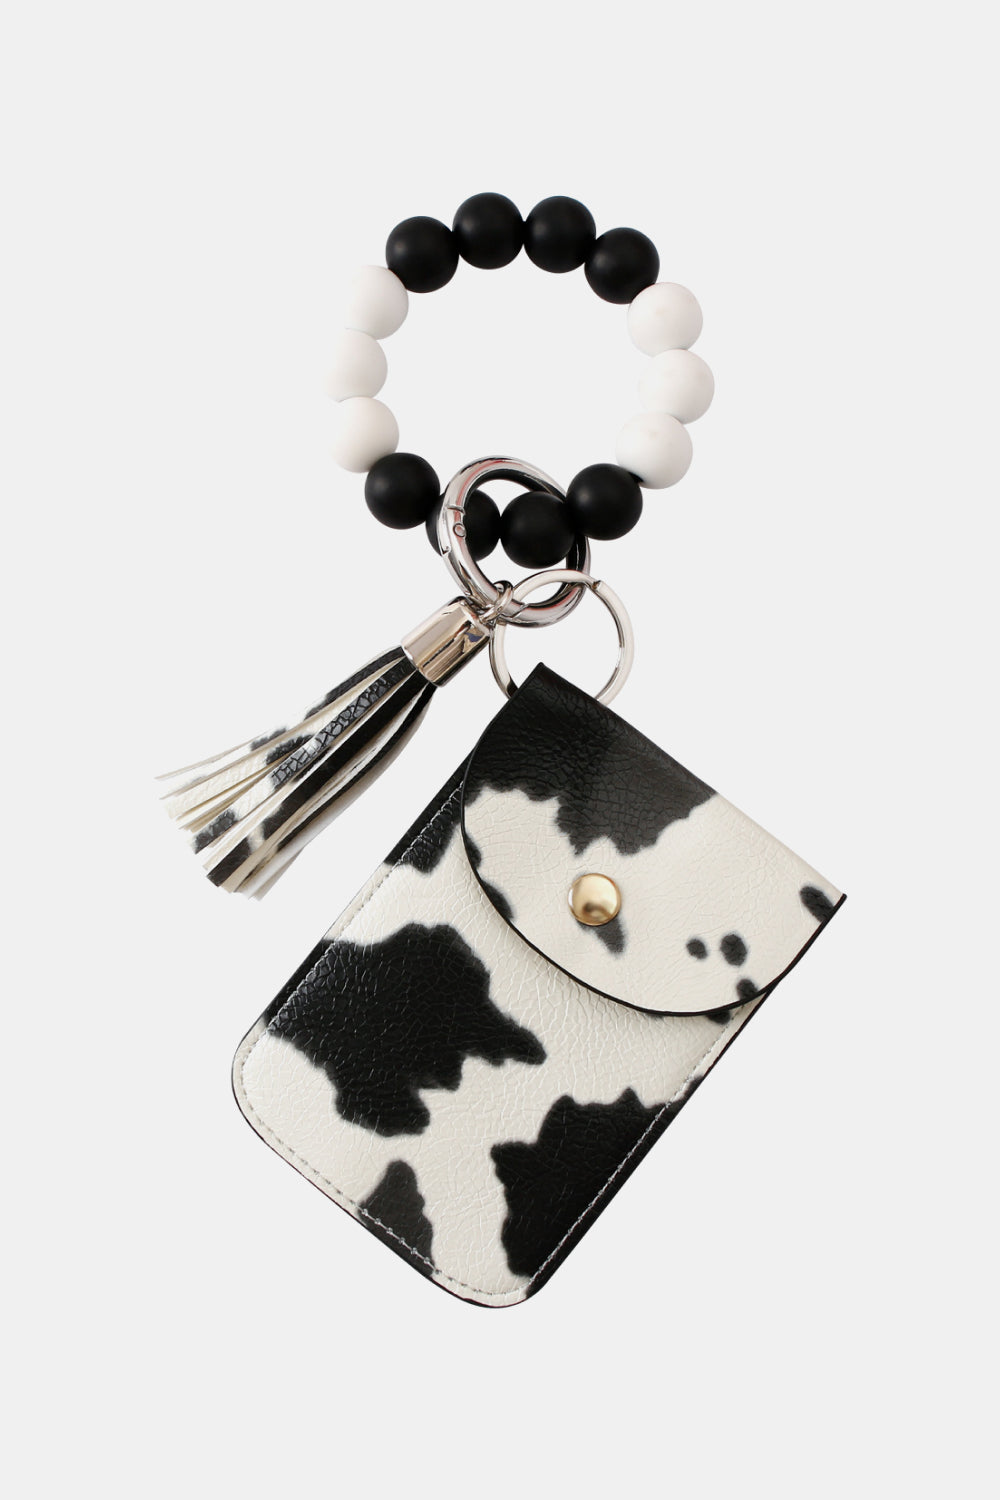 Bead Wristlet Key Chain with Wallet The Stout Steer